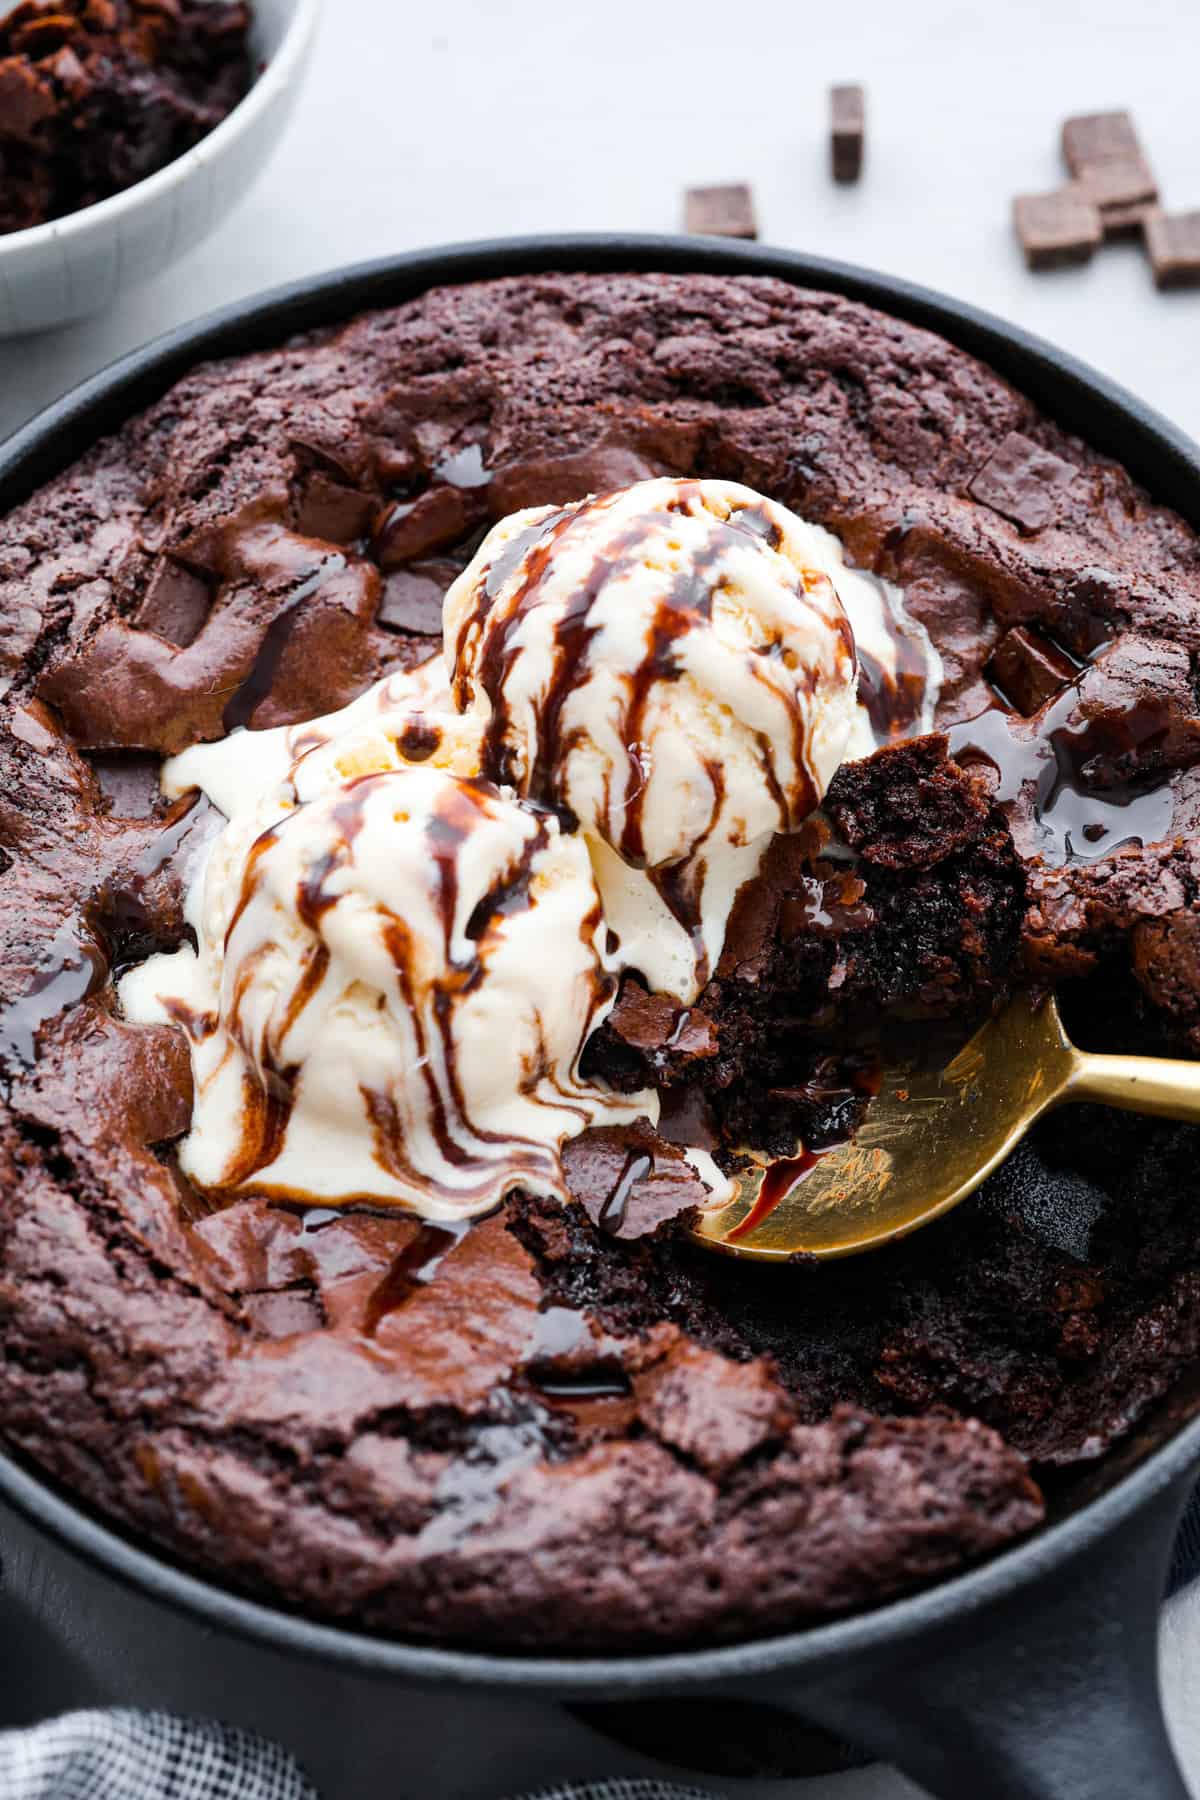 The 10 Best Pans for Brownies